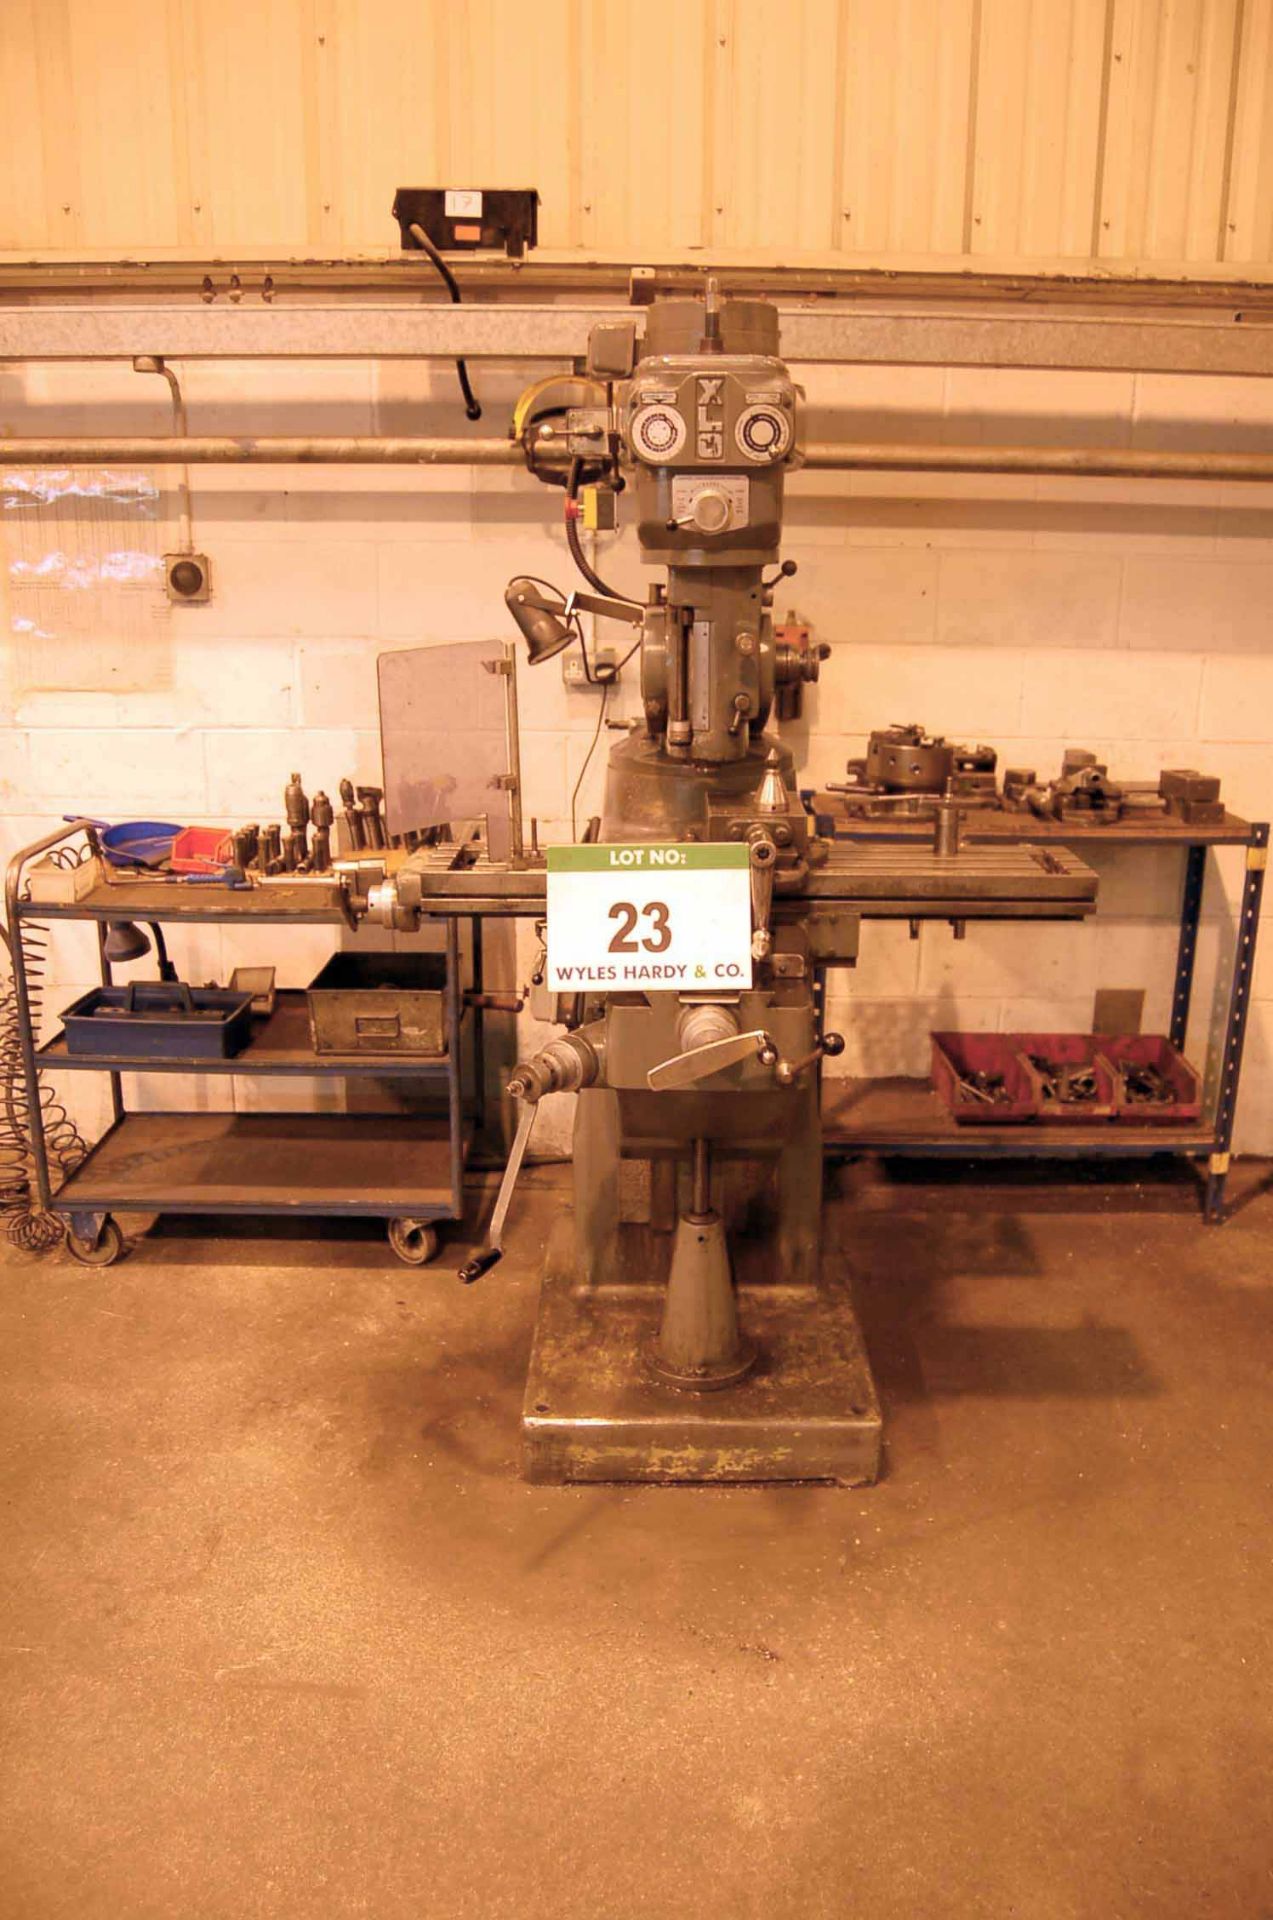 An EX-CELL-O Model 602 Horizontal Turret Head Milling Machine, Serial No. 6021584A with 1070mm x